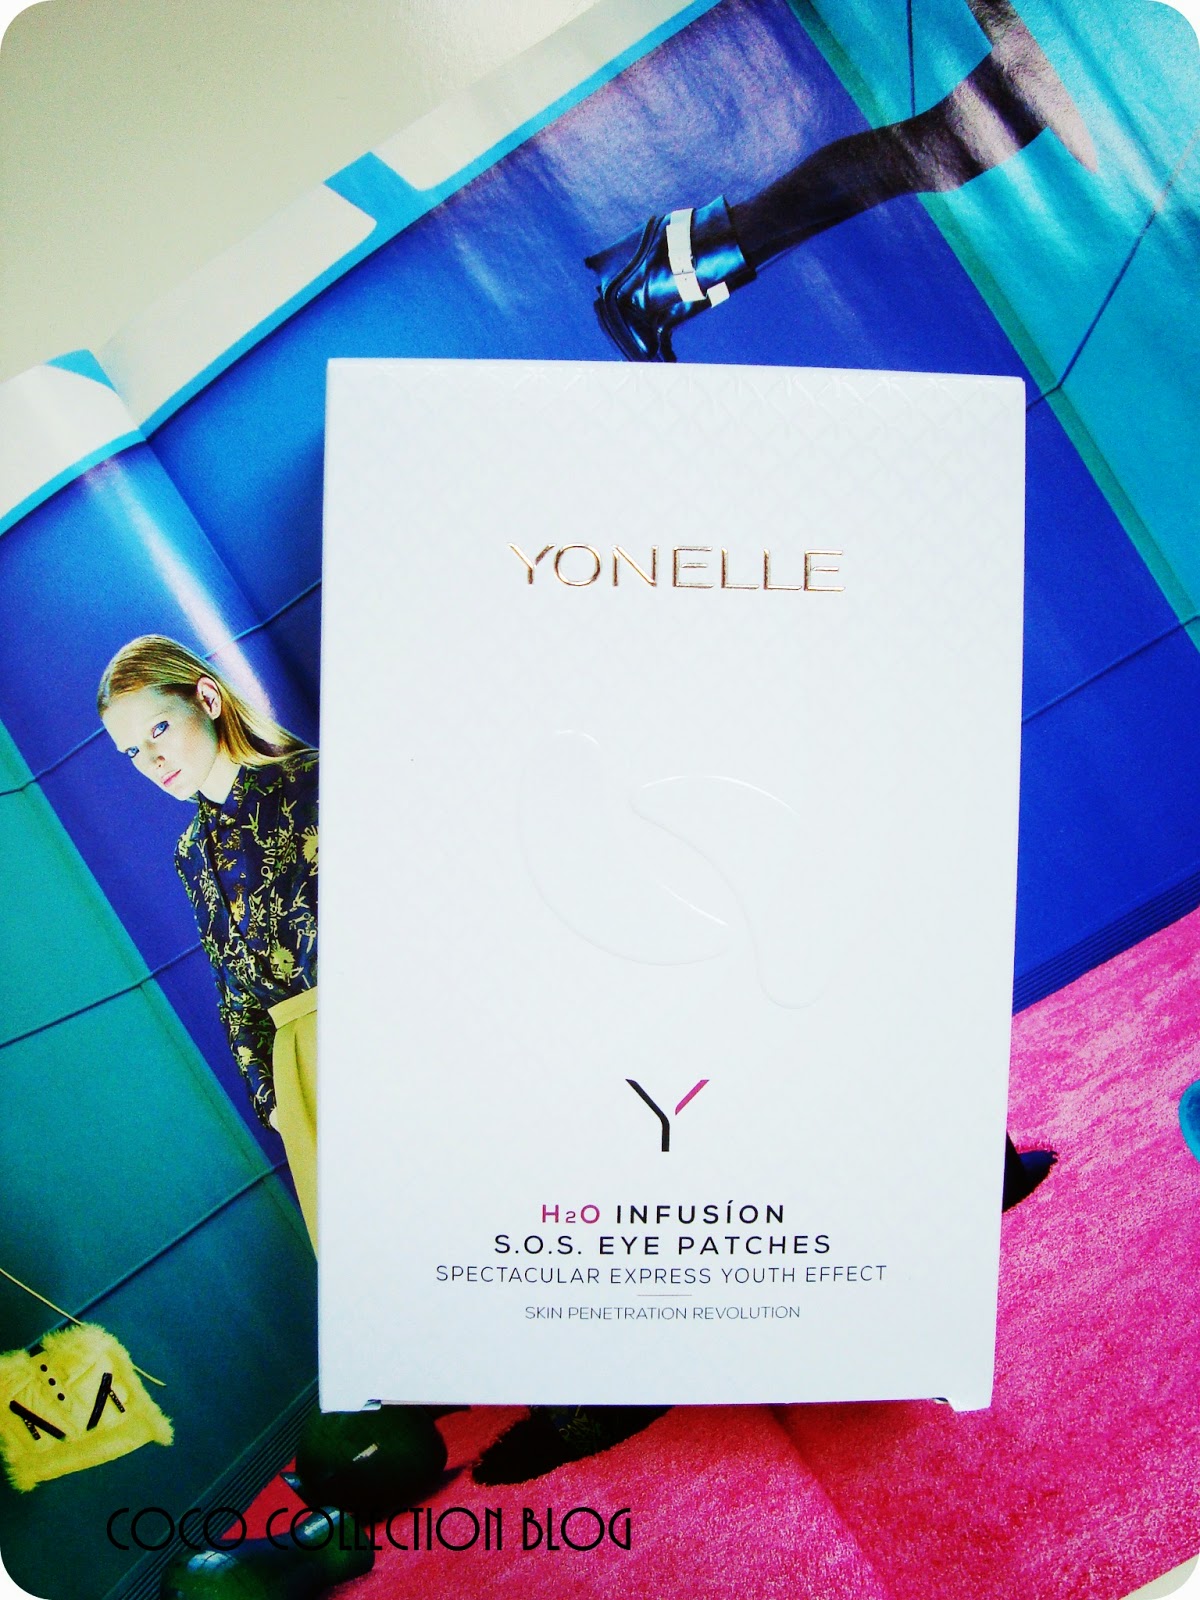 YONELLE H2O Infusion S.O.S. Eye Patches 